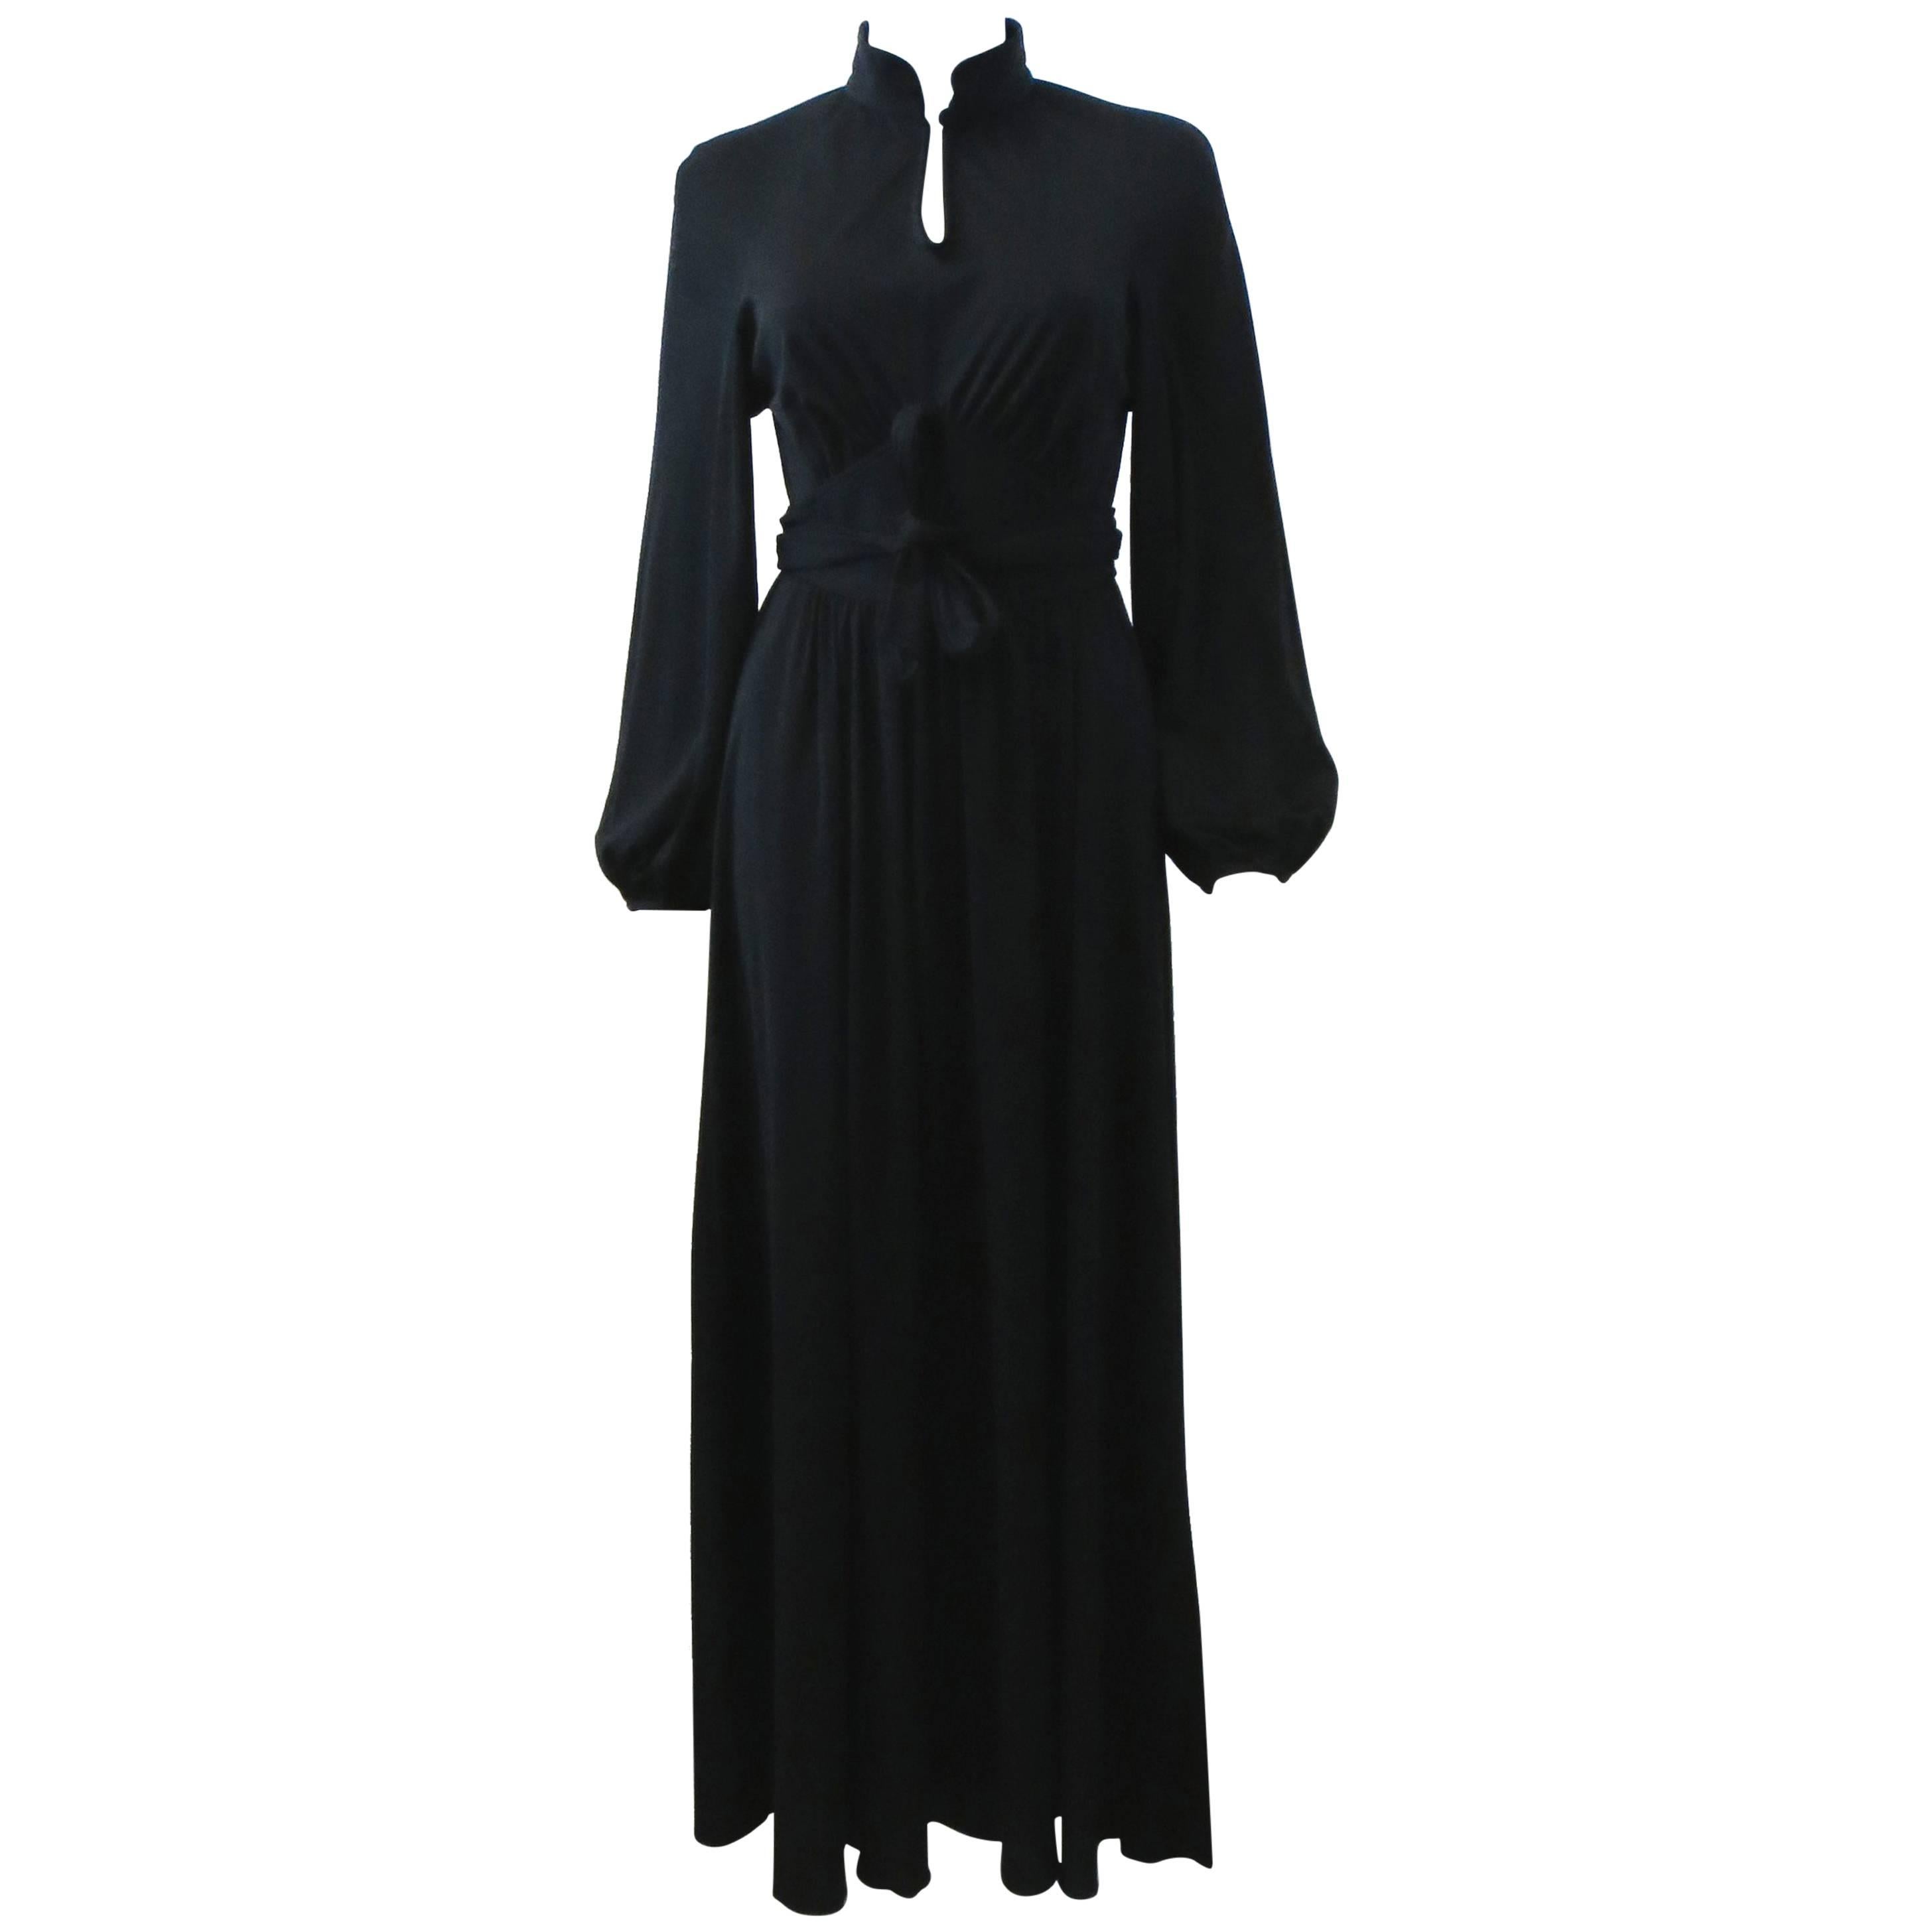 1970s Quorum Black Maxi Dress with Bell Sleeves and Tie Waist Belt